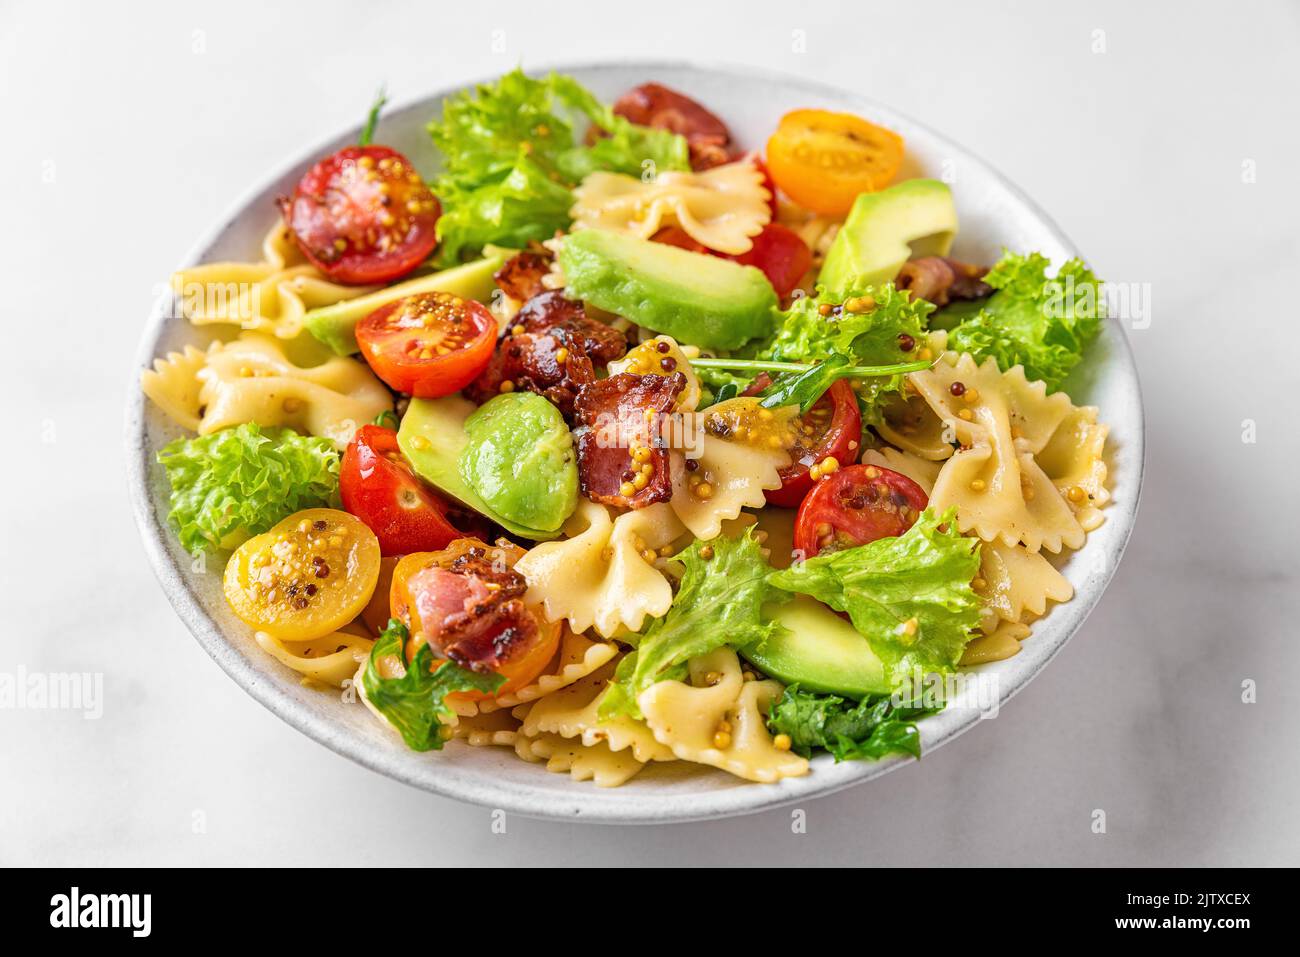 Pasta farfalle salad with tomato, bacon, avocado and mustard dressing in a plate on white table. Close up. Healthy italian food Stock Photo